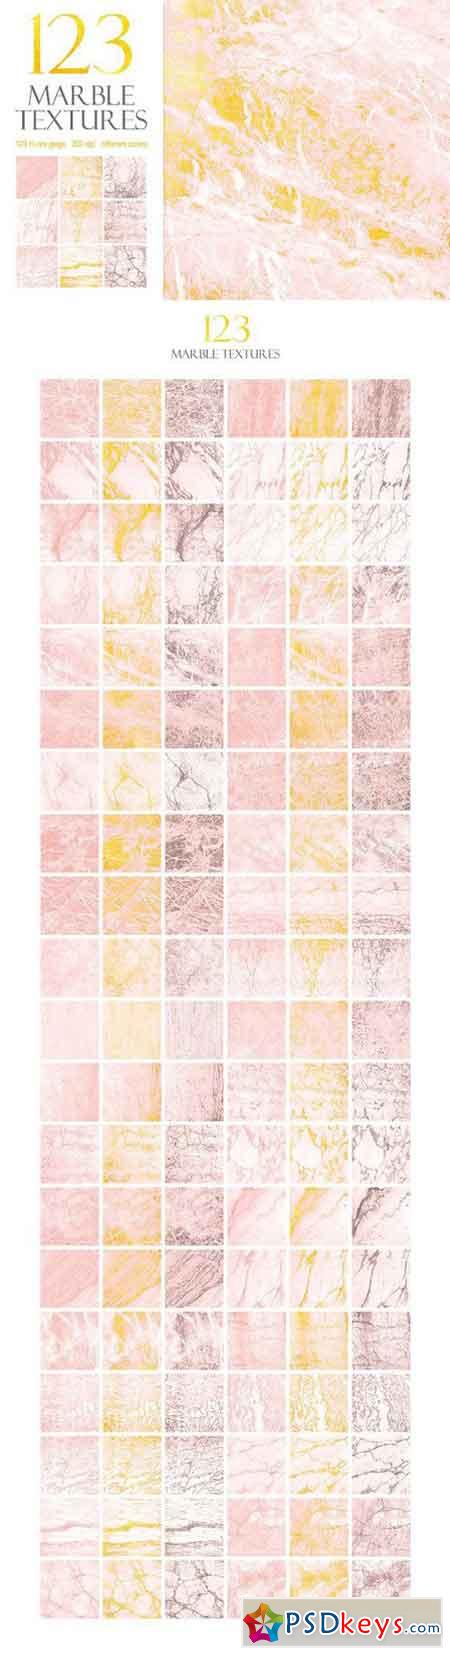 123 Marble Pink & Gold Textures 1405434